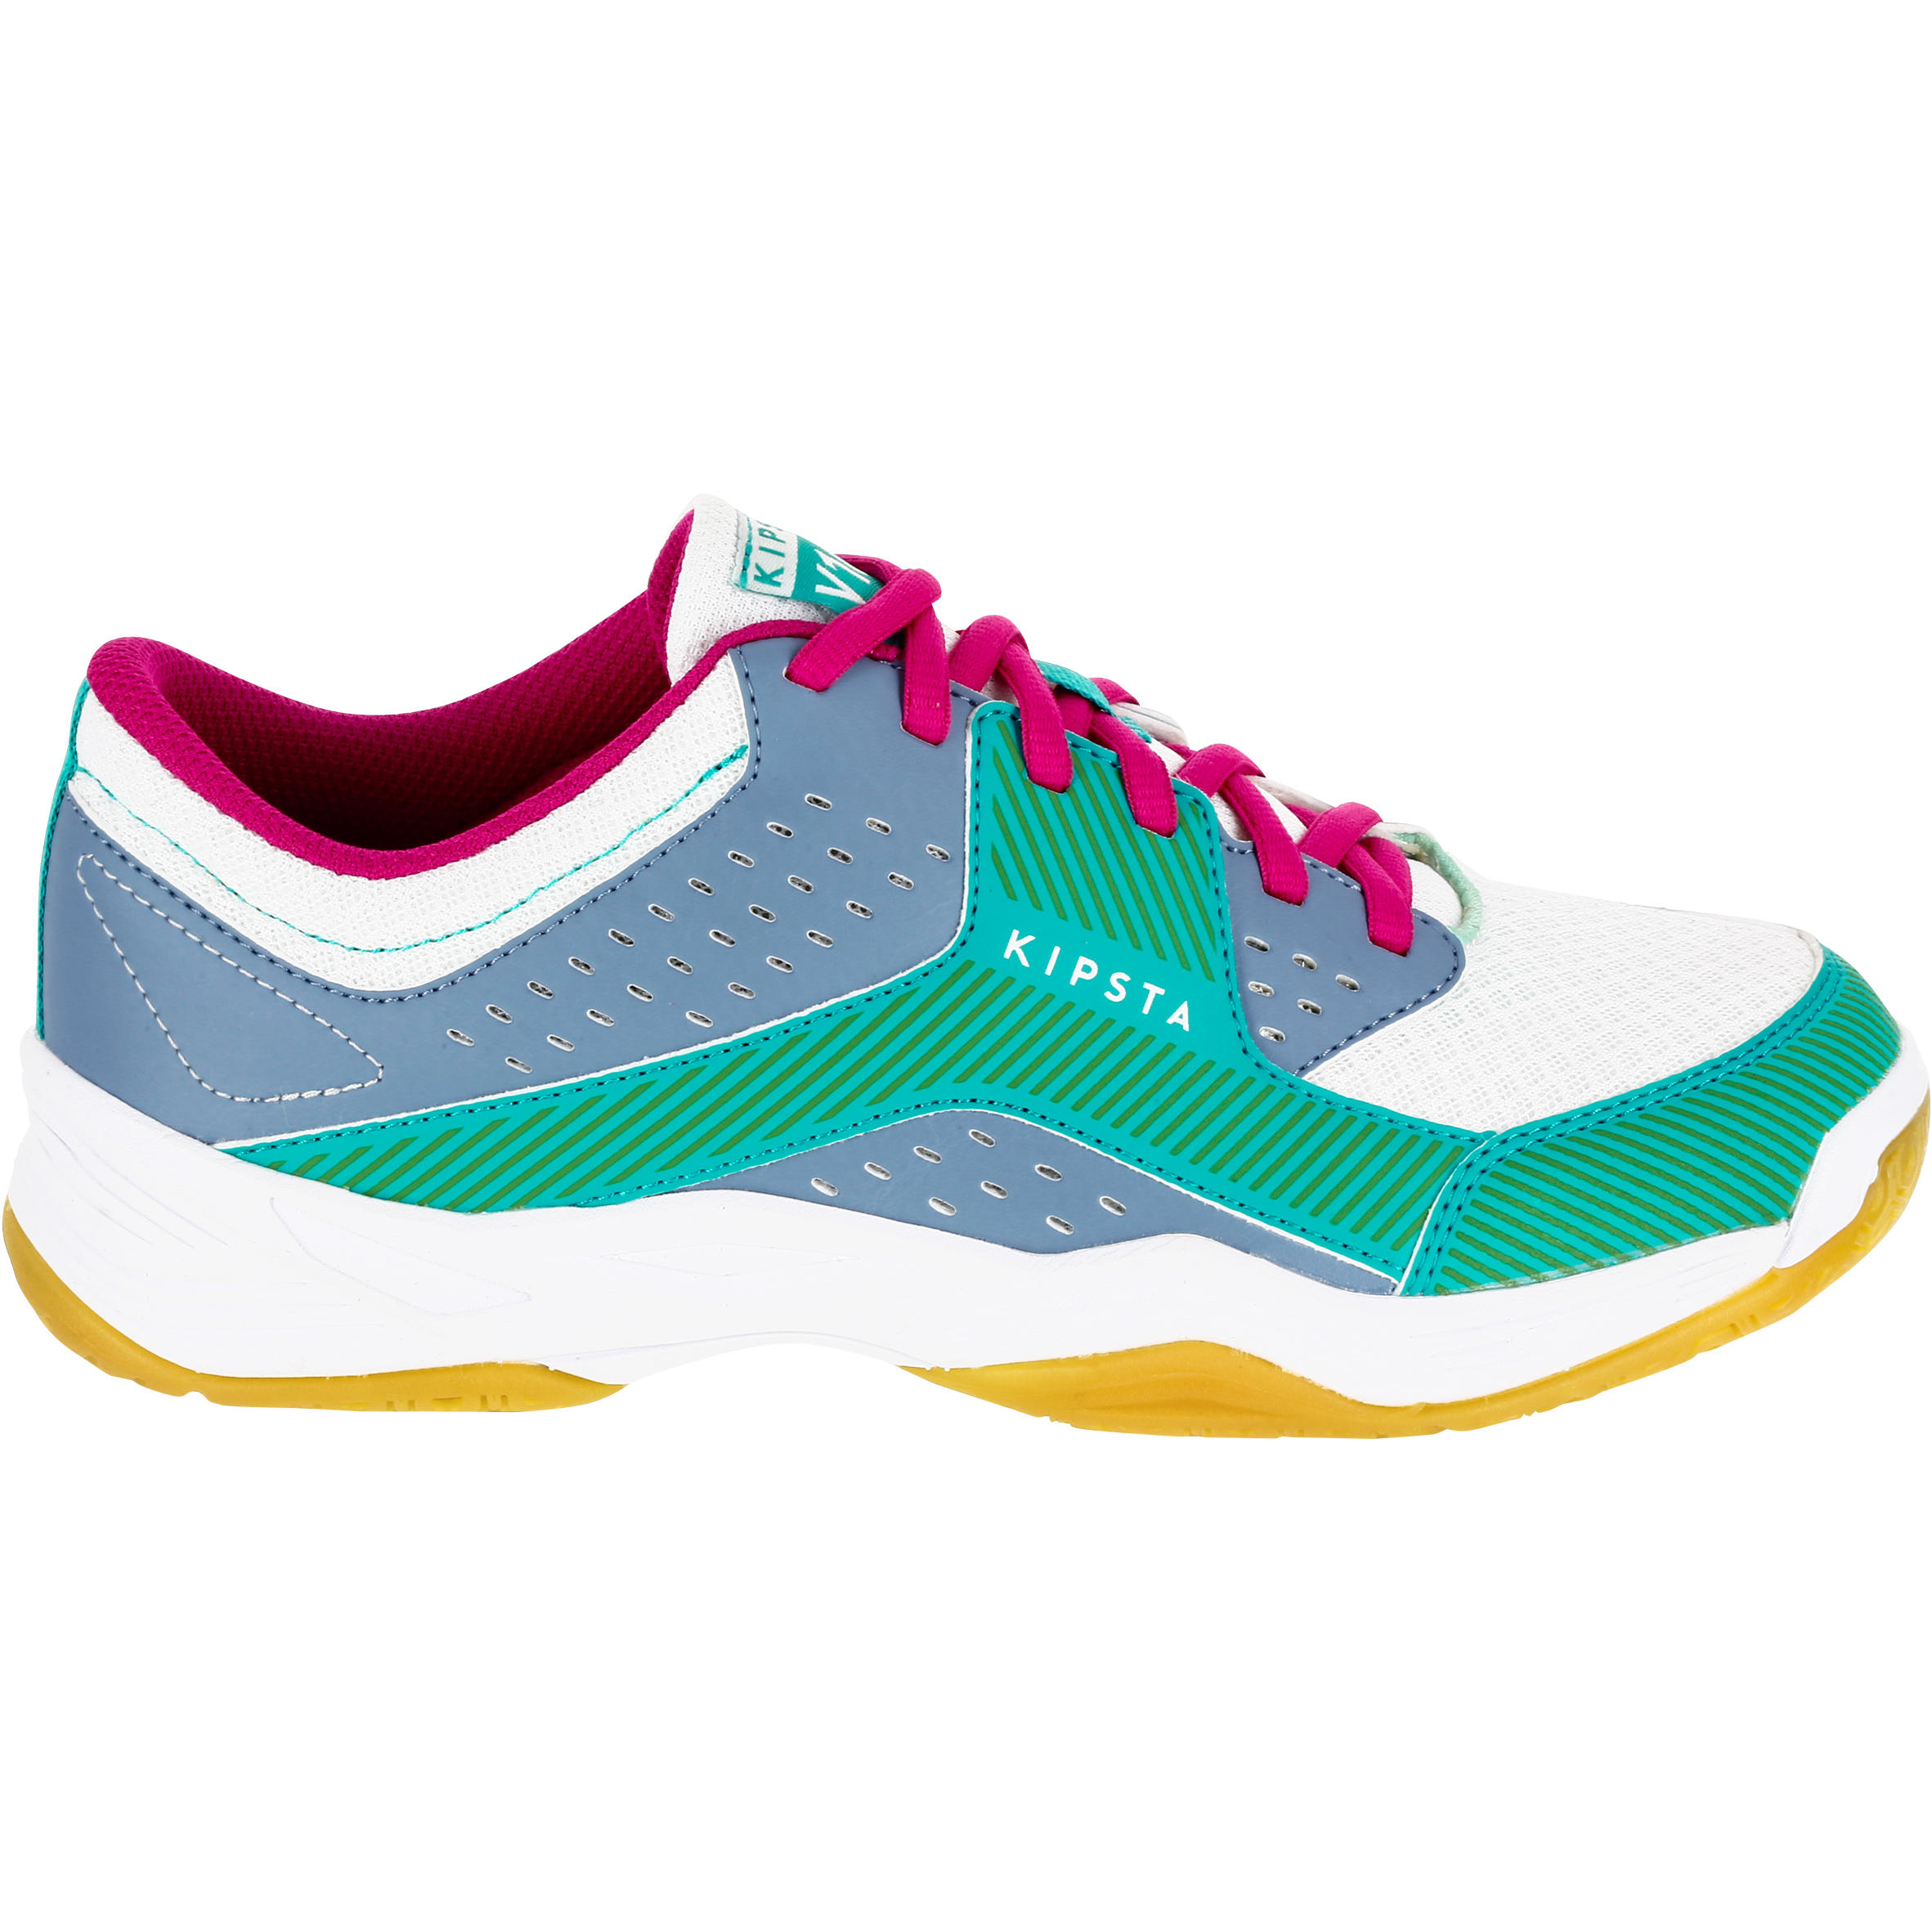 Volleyball Shoes - Blue/Green - Decathlon